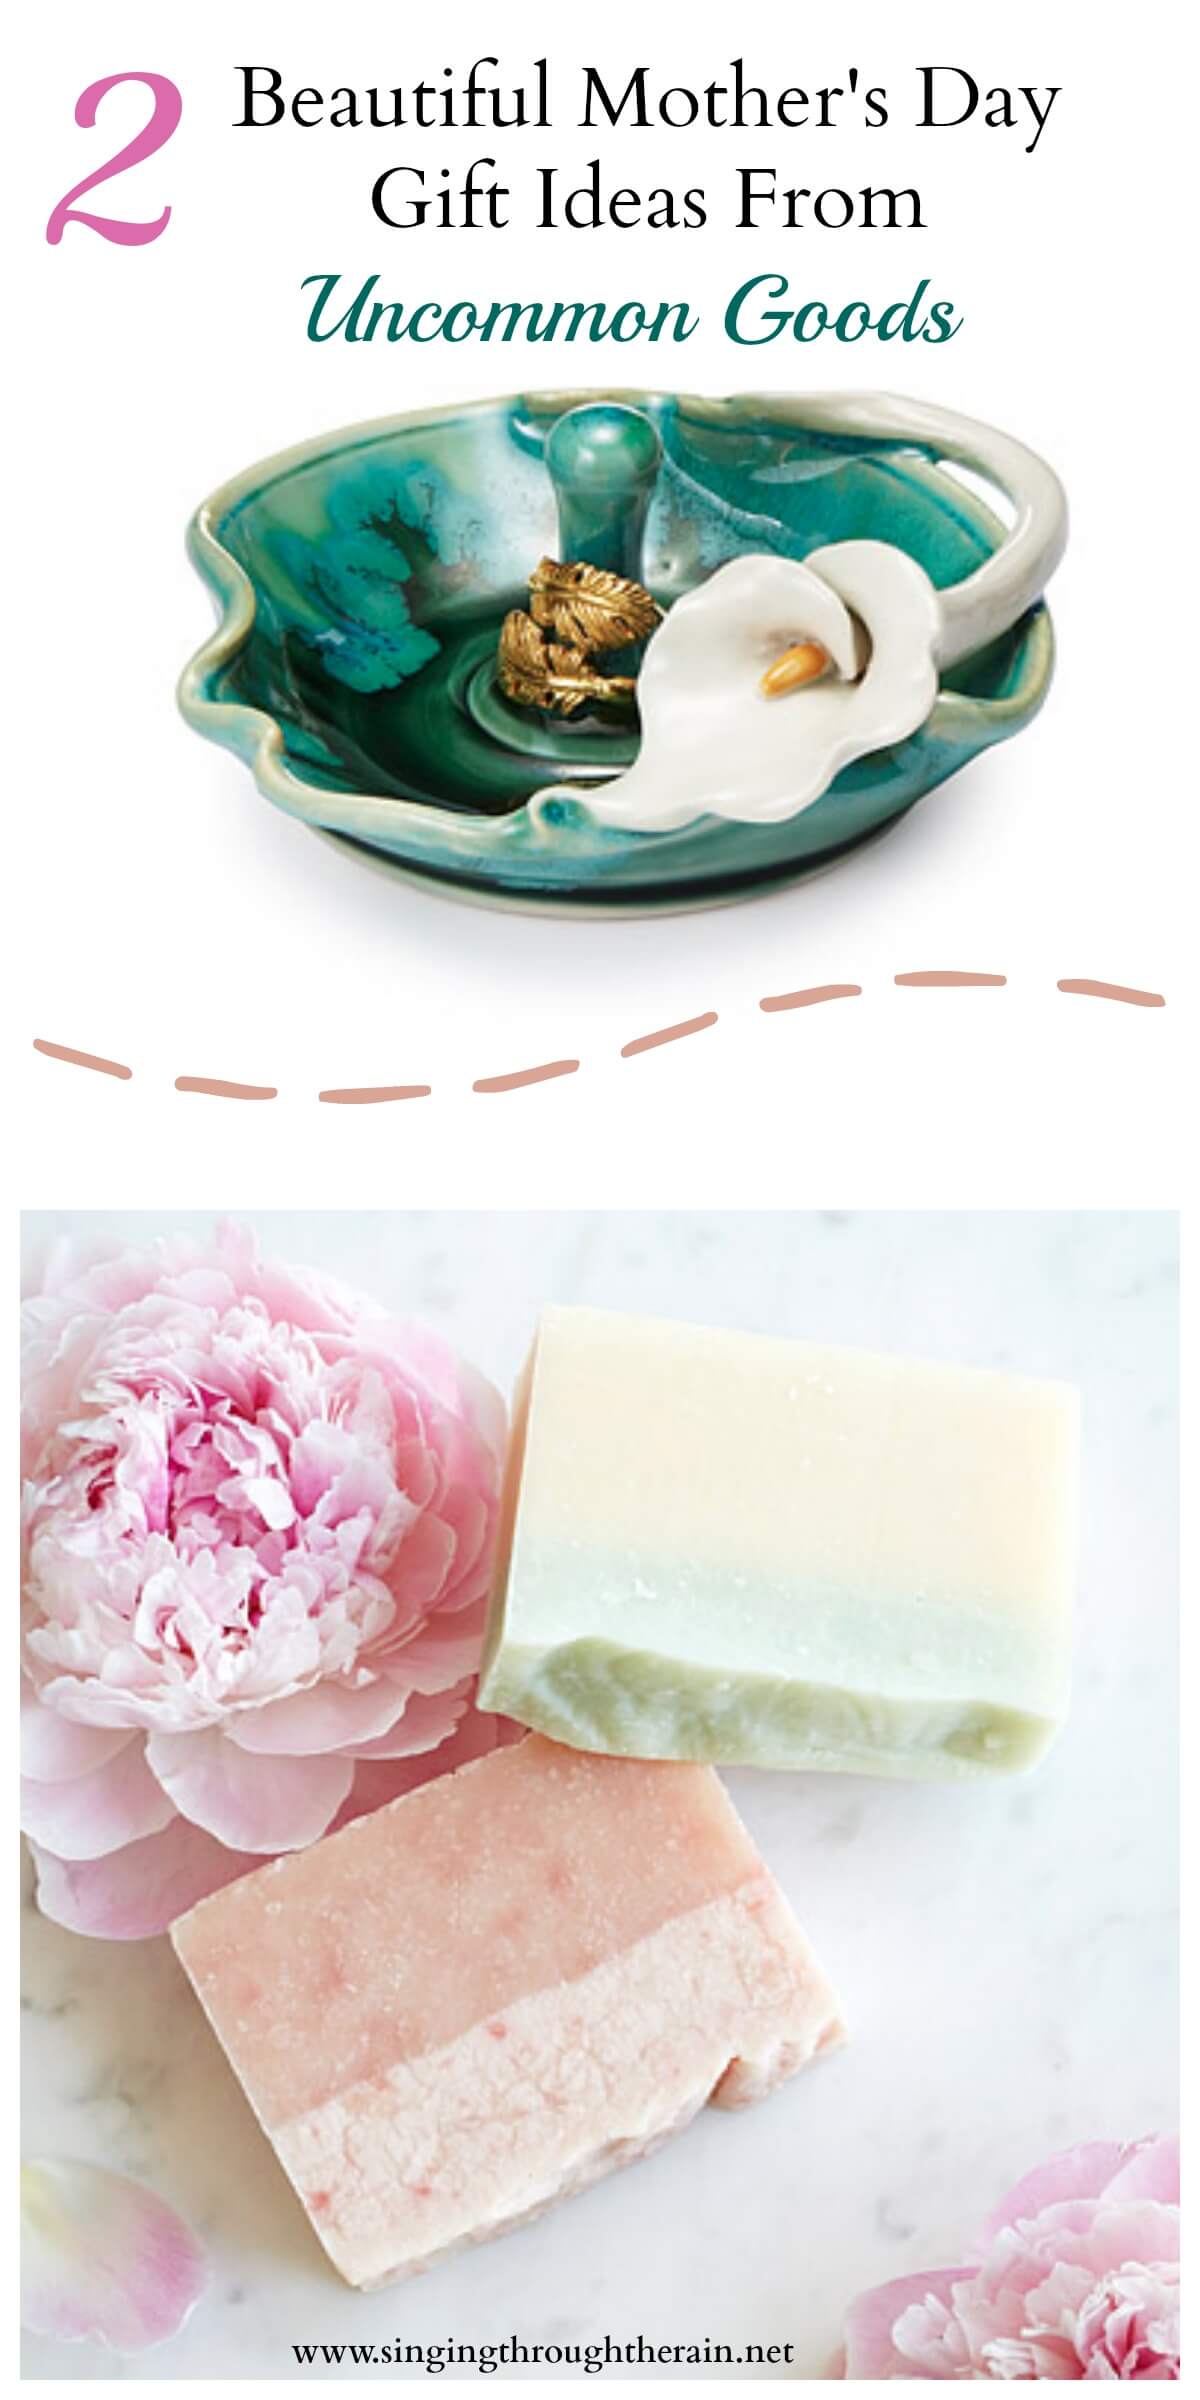 Beautiful Mother’s Day Gift Ideas From UncommonGoods